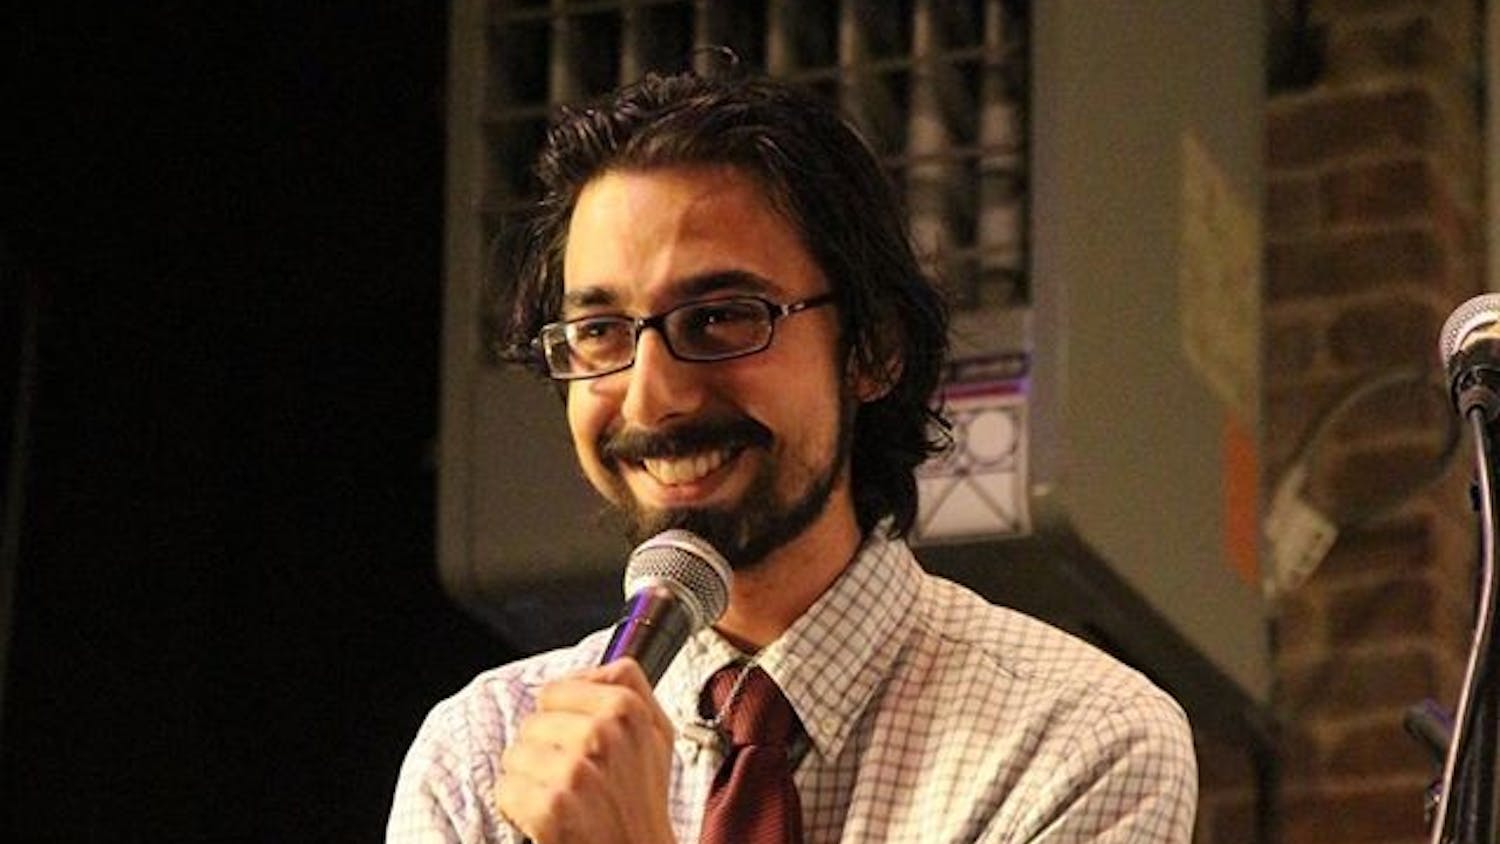 Krish Mohan has opened for popular comedians like Stewart Huff, Lee Camp, Cameron Esposito, Henry Phillips, Dom Irerra and Dave Coulier.